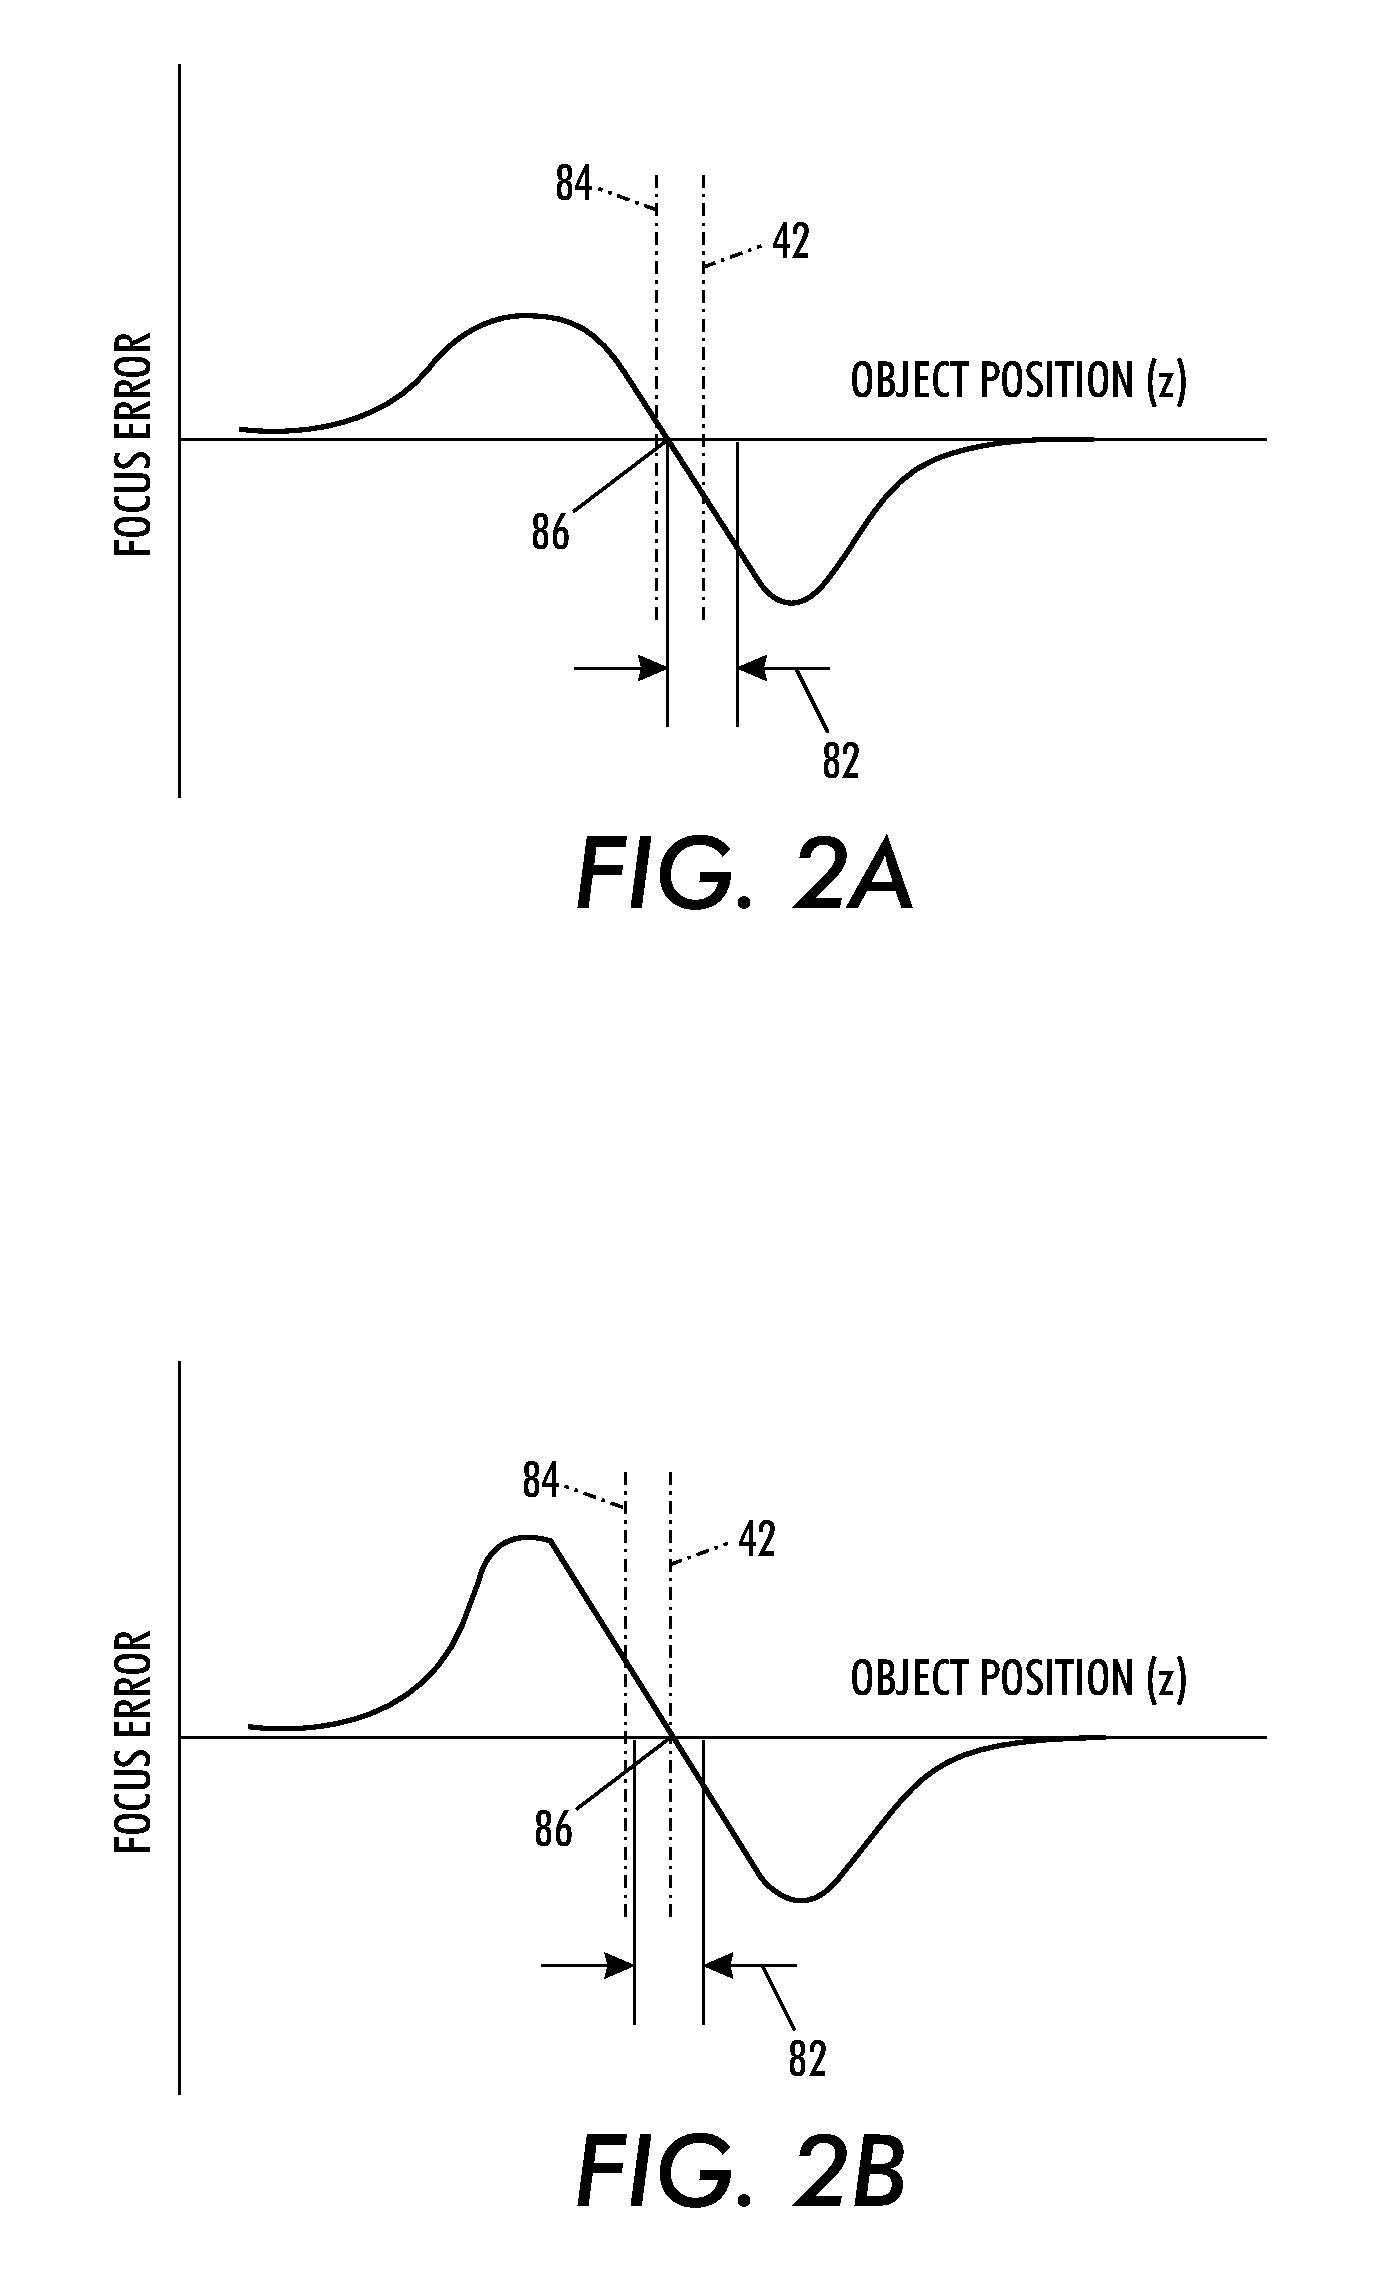 Partial coherence interferometer with measurement ambiguity resolution